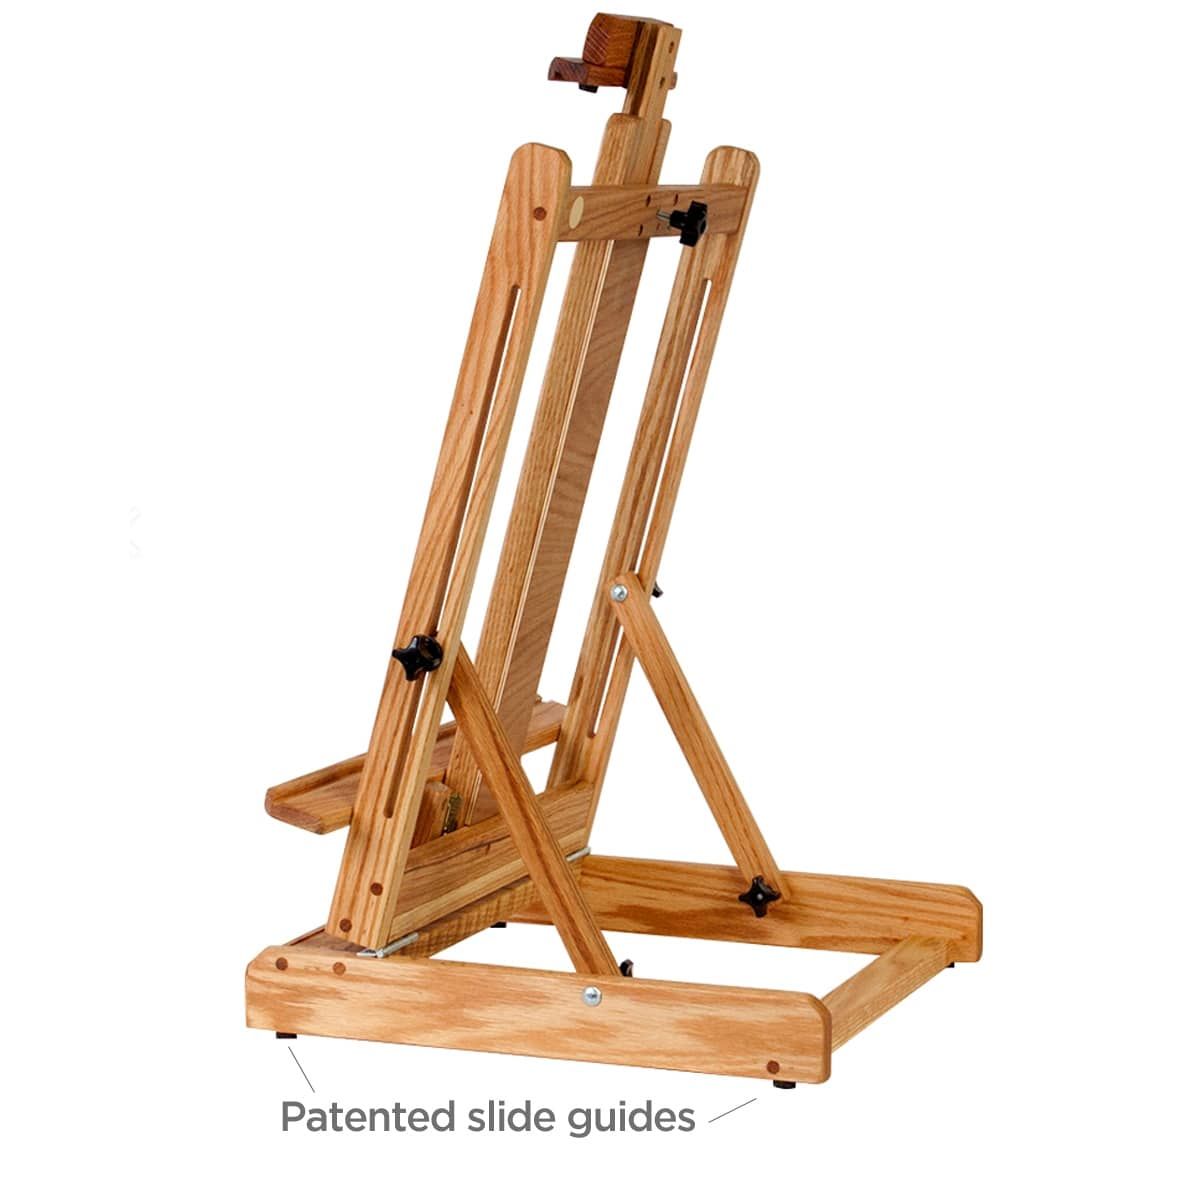 Patented slide guides - Professional Table Easel